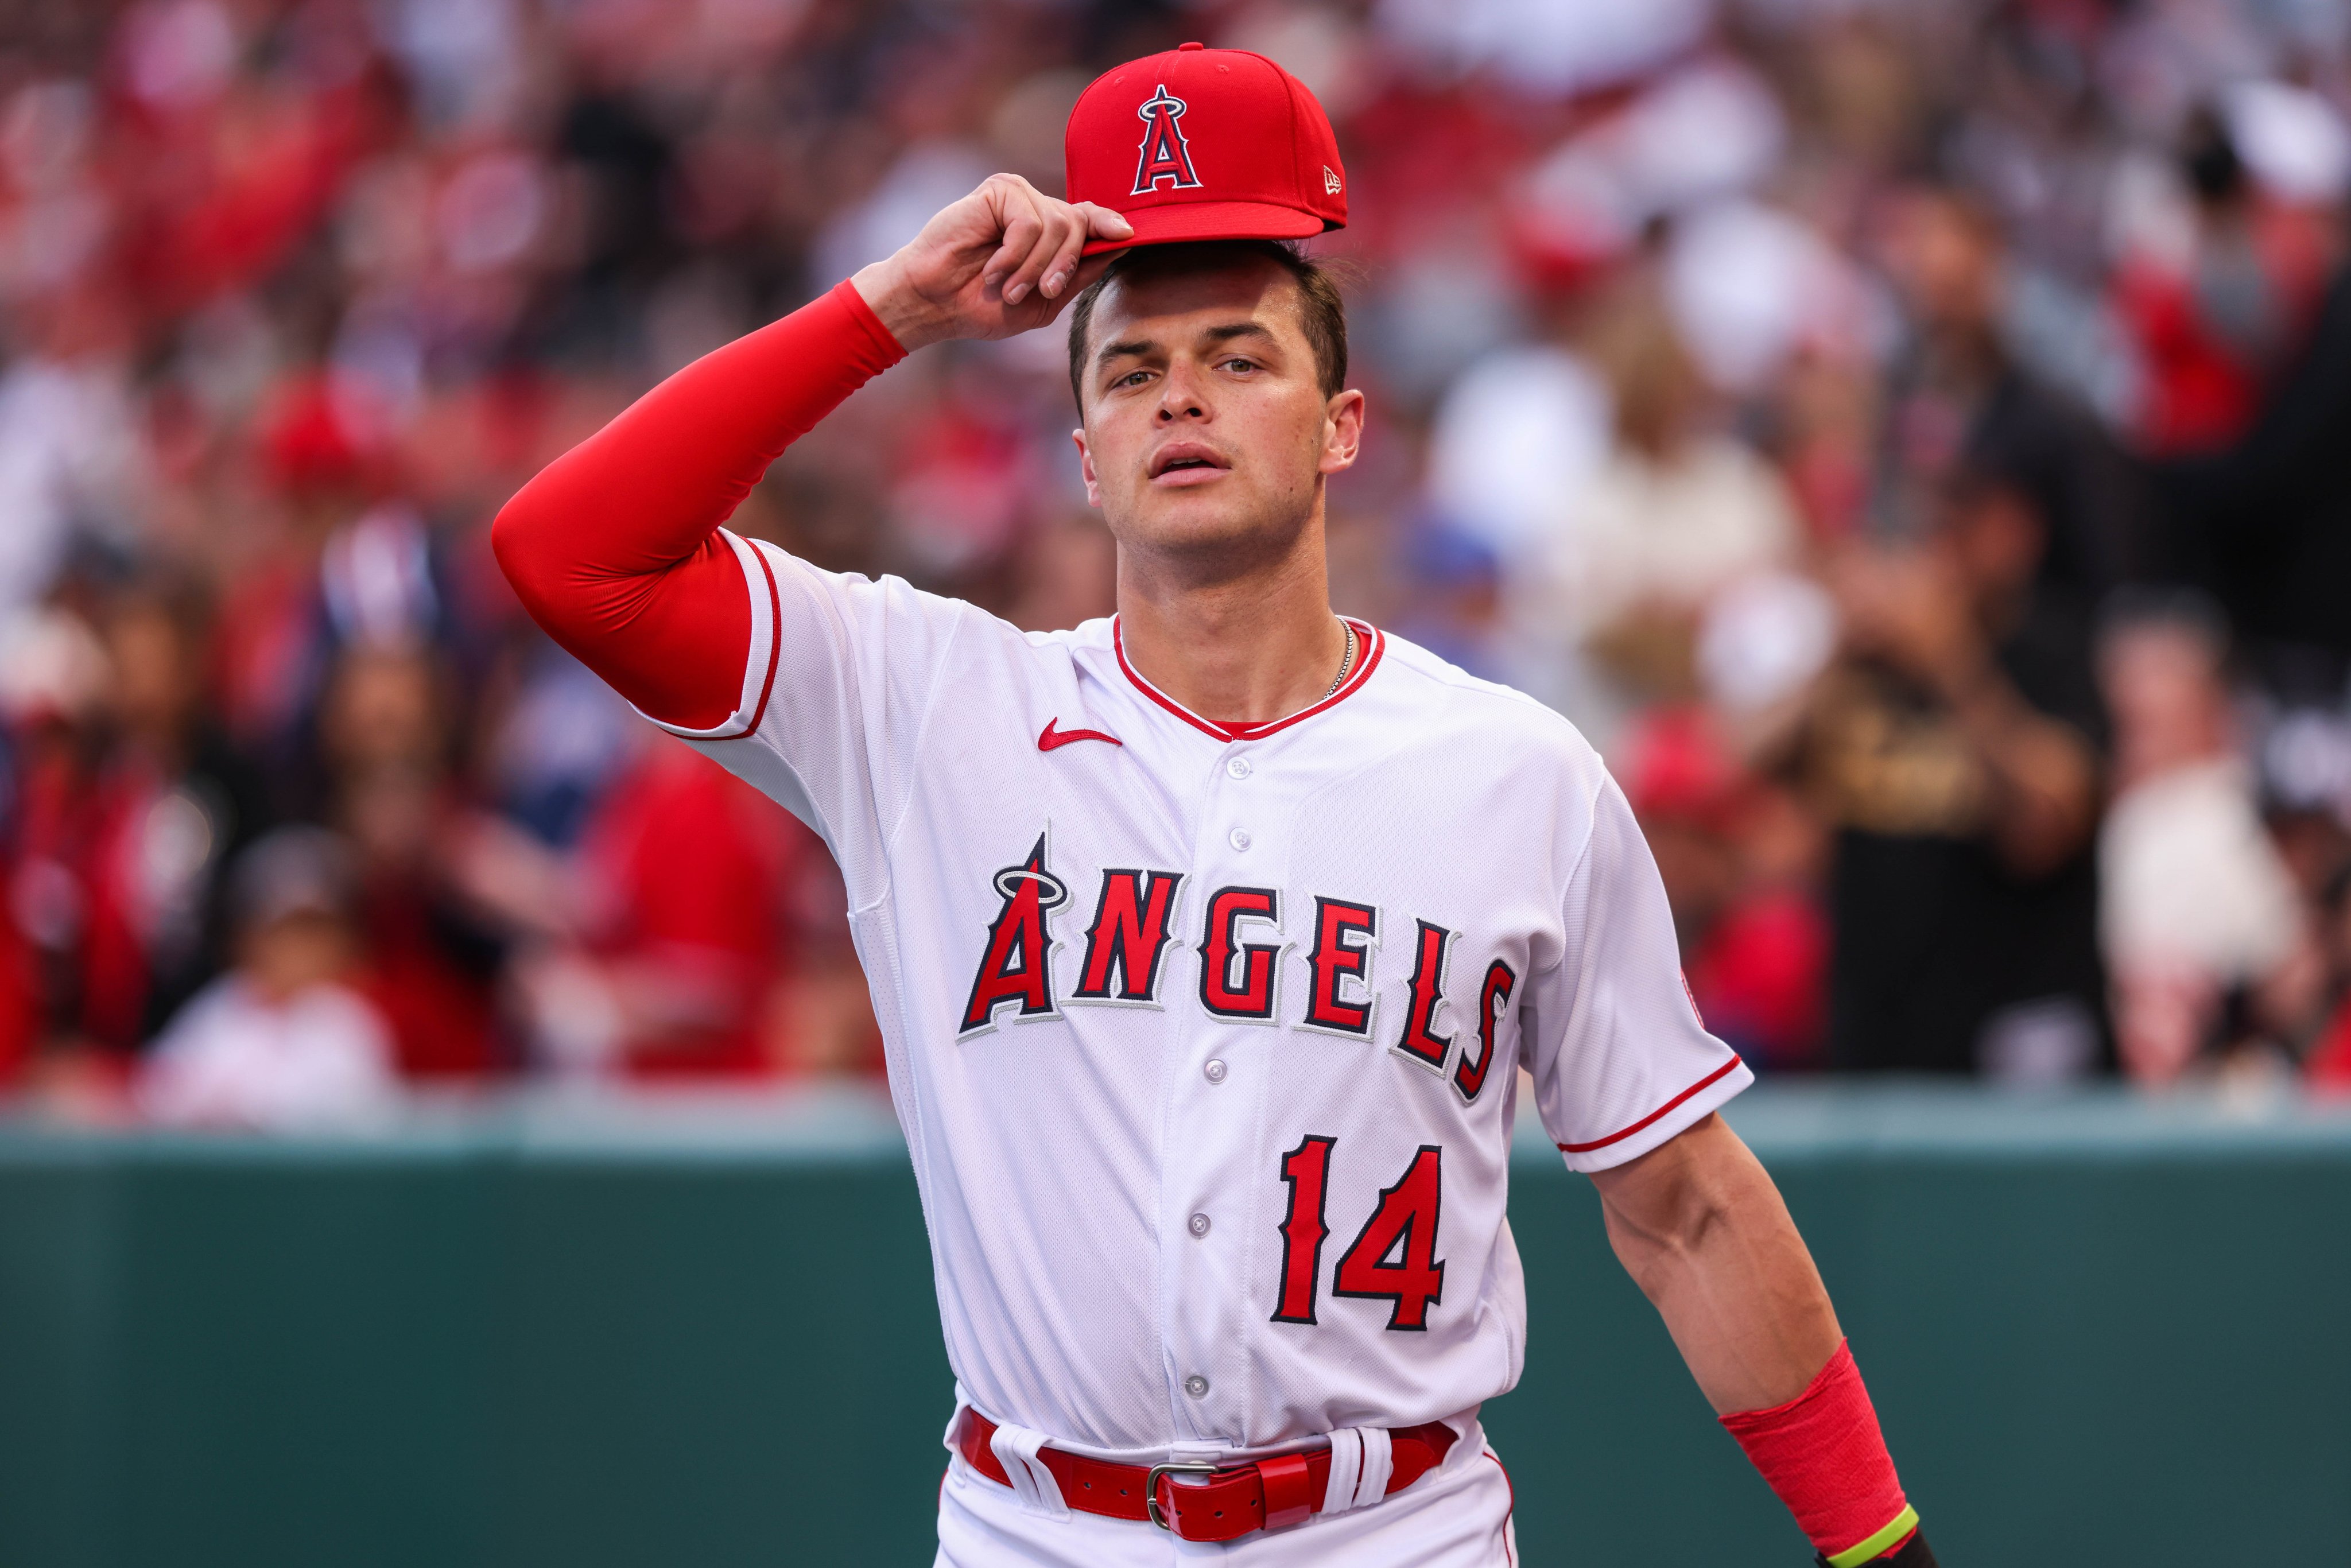 MLB Pipeline on X: For the first time since injuring his left shoulder on  April 20, Logan O'Hoppe was able to put on his gear and catch today. If the  top #Angels